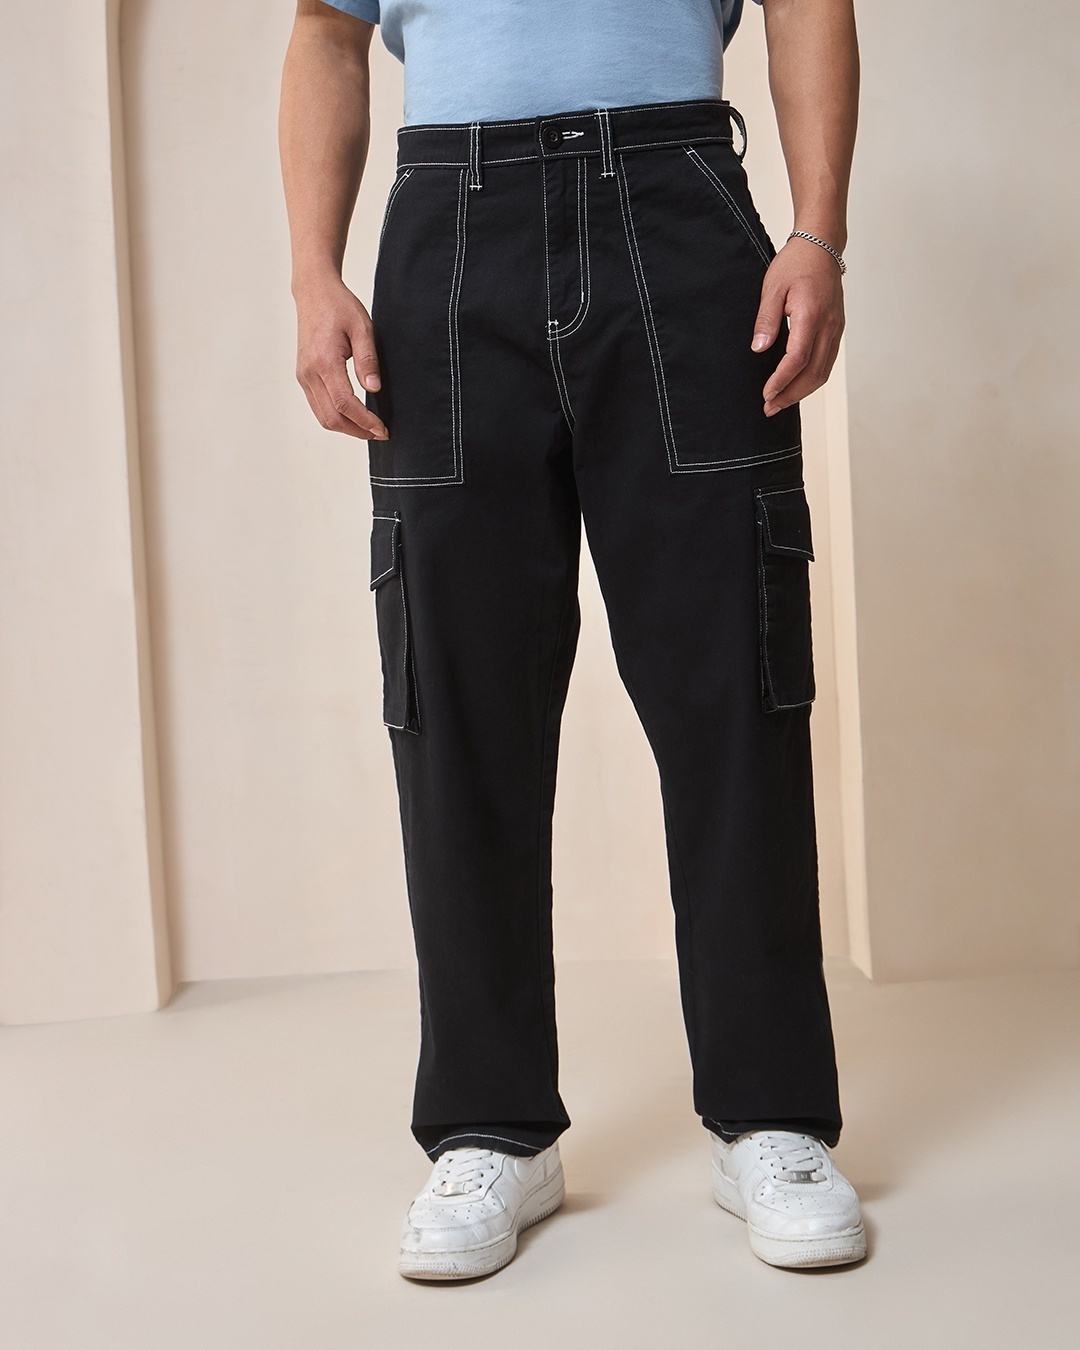 model wearing Different Types of Cargo Pants as Cargo Jeans